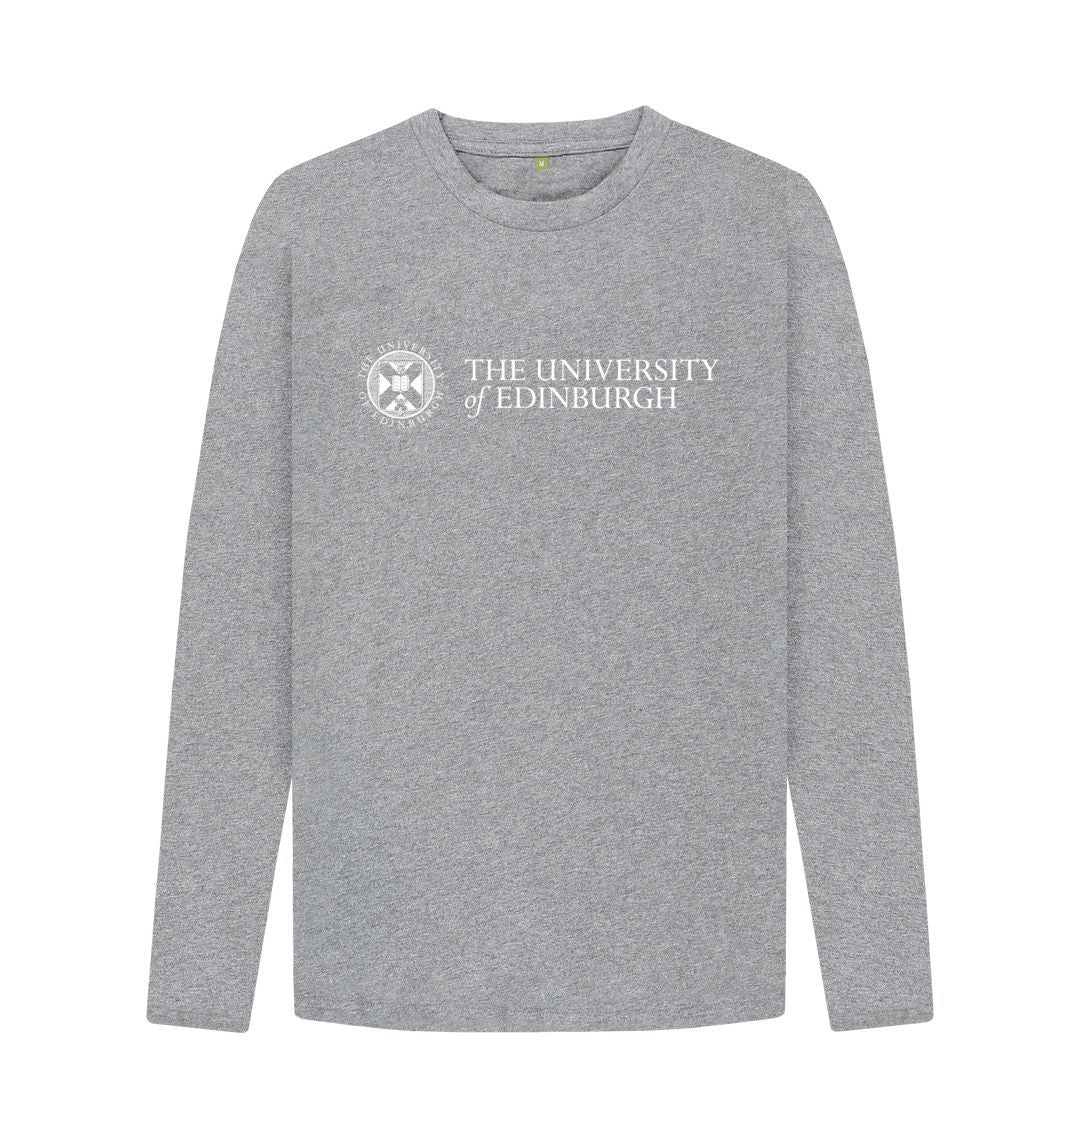 A light grey long sleeved t-shirt with the University logo printed across the chest in white